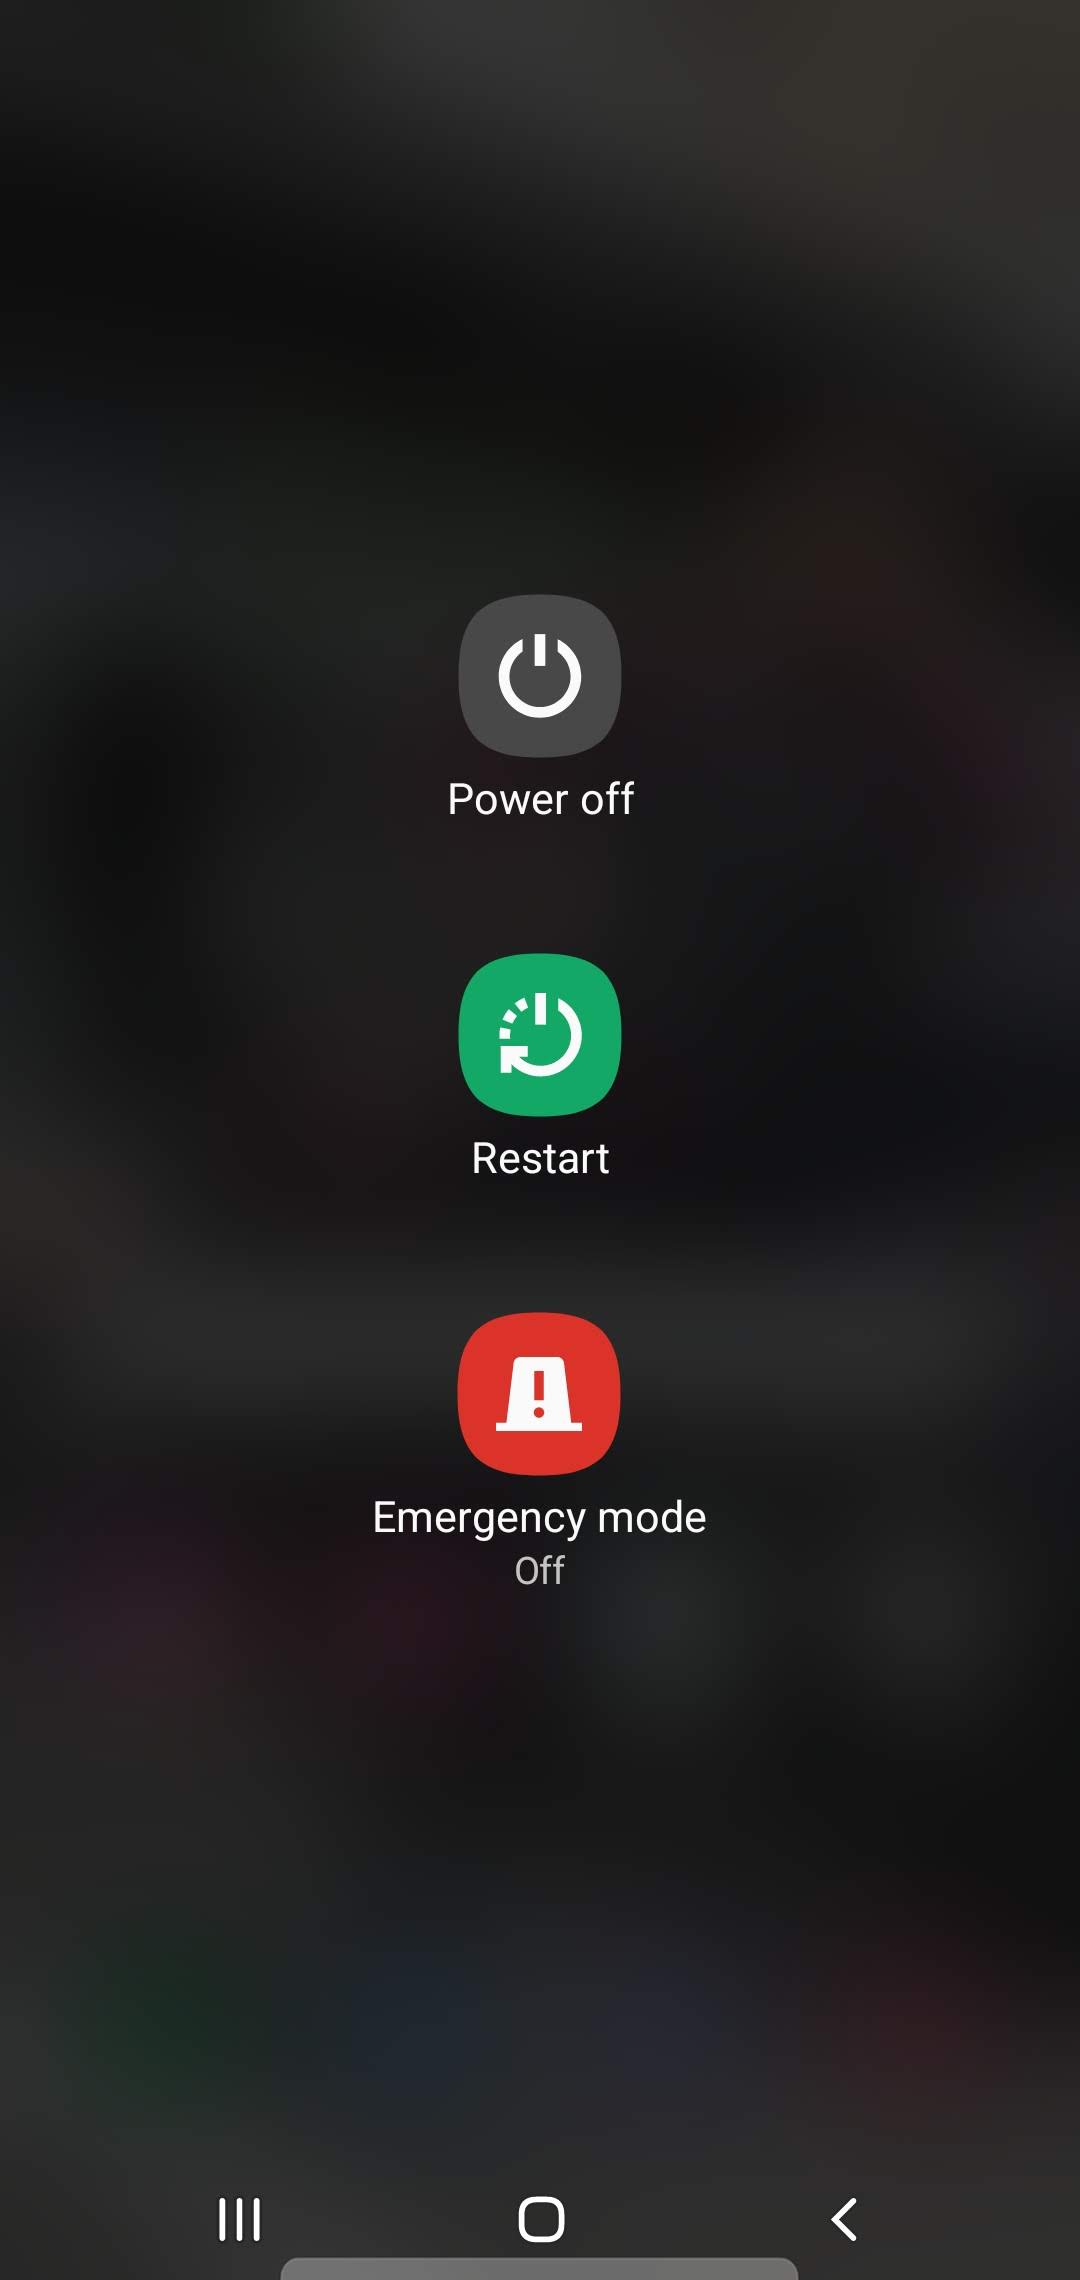 Turn off Samsung phone from notification panel 3